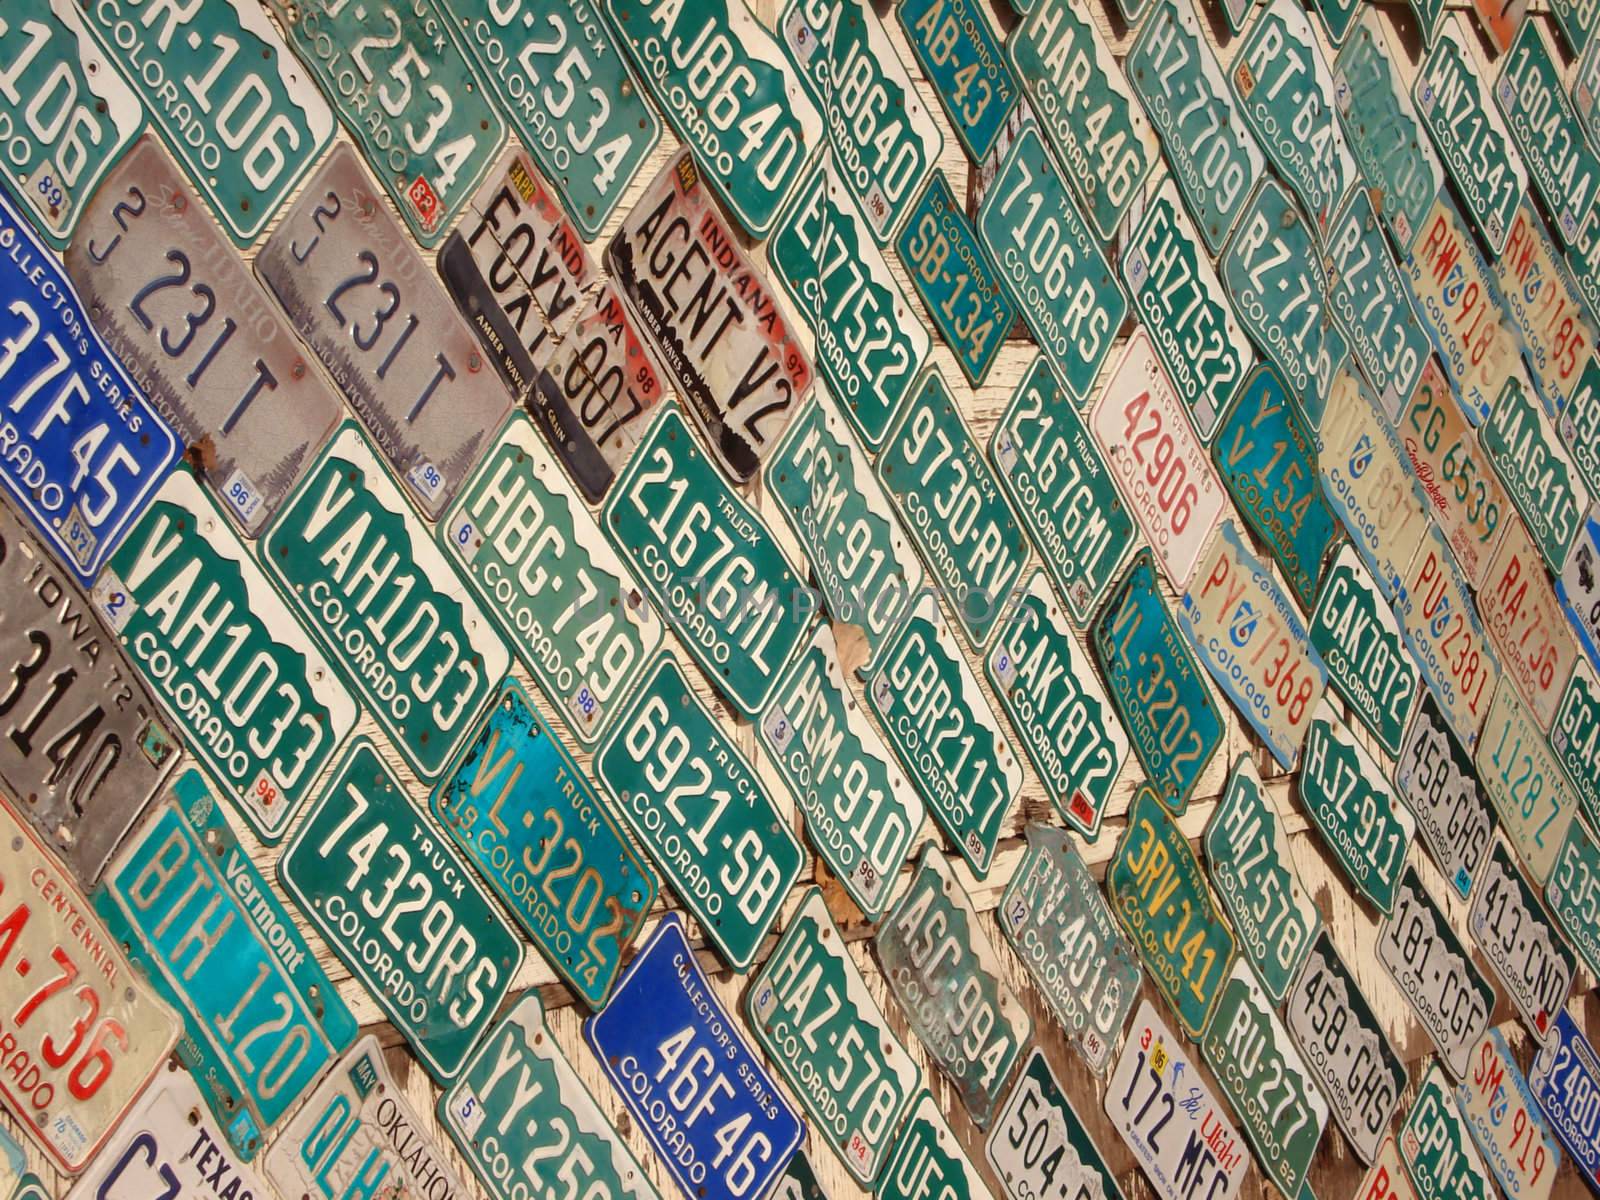 A wall is covered with different color license plates.